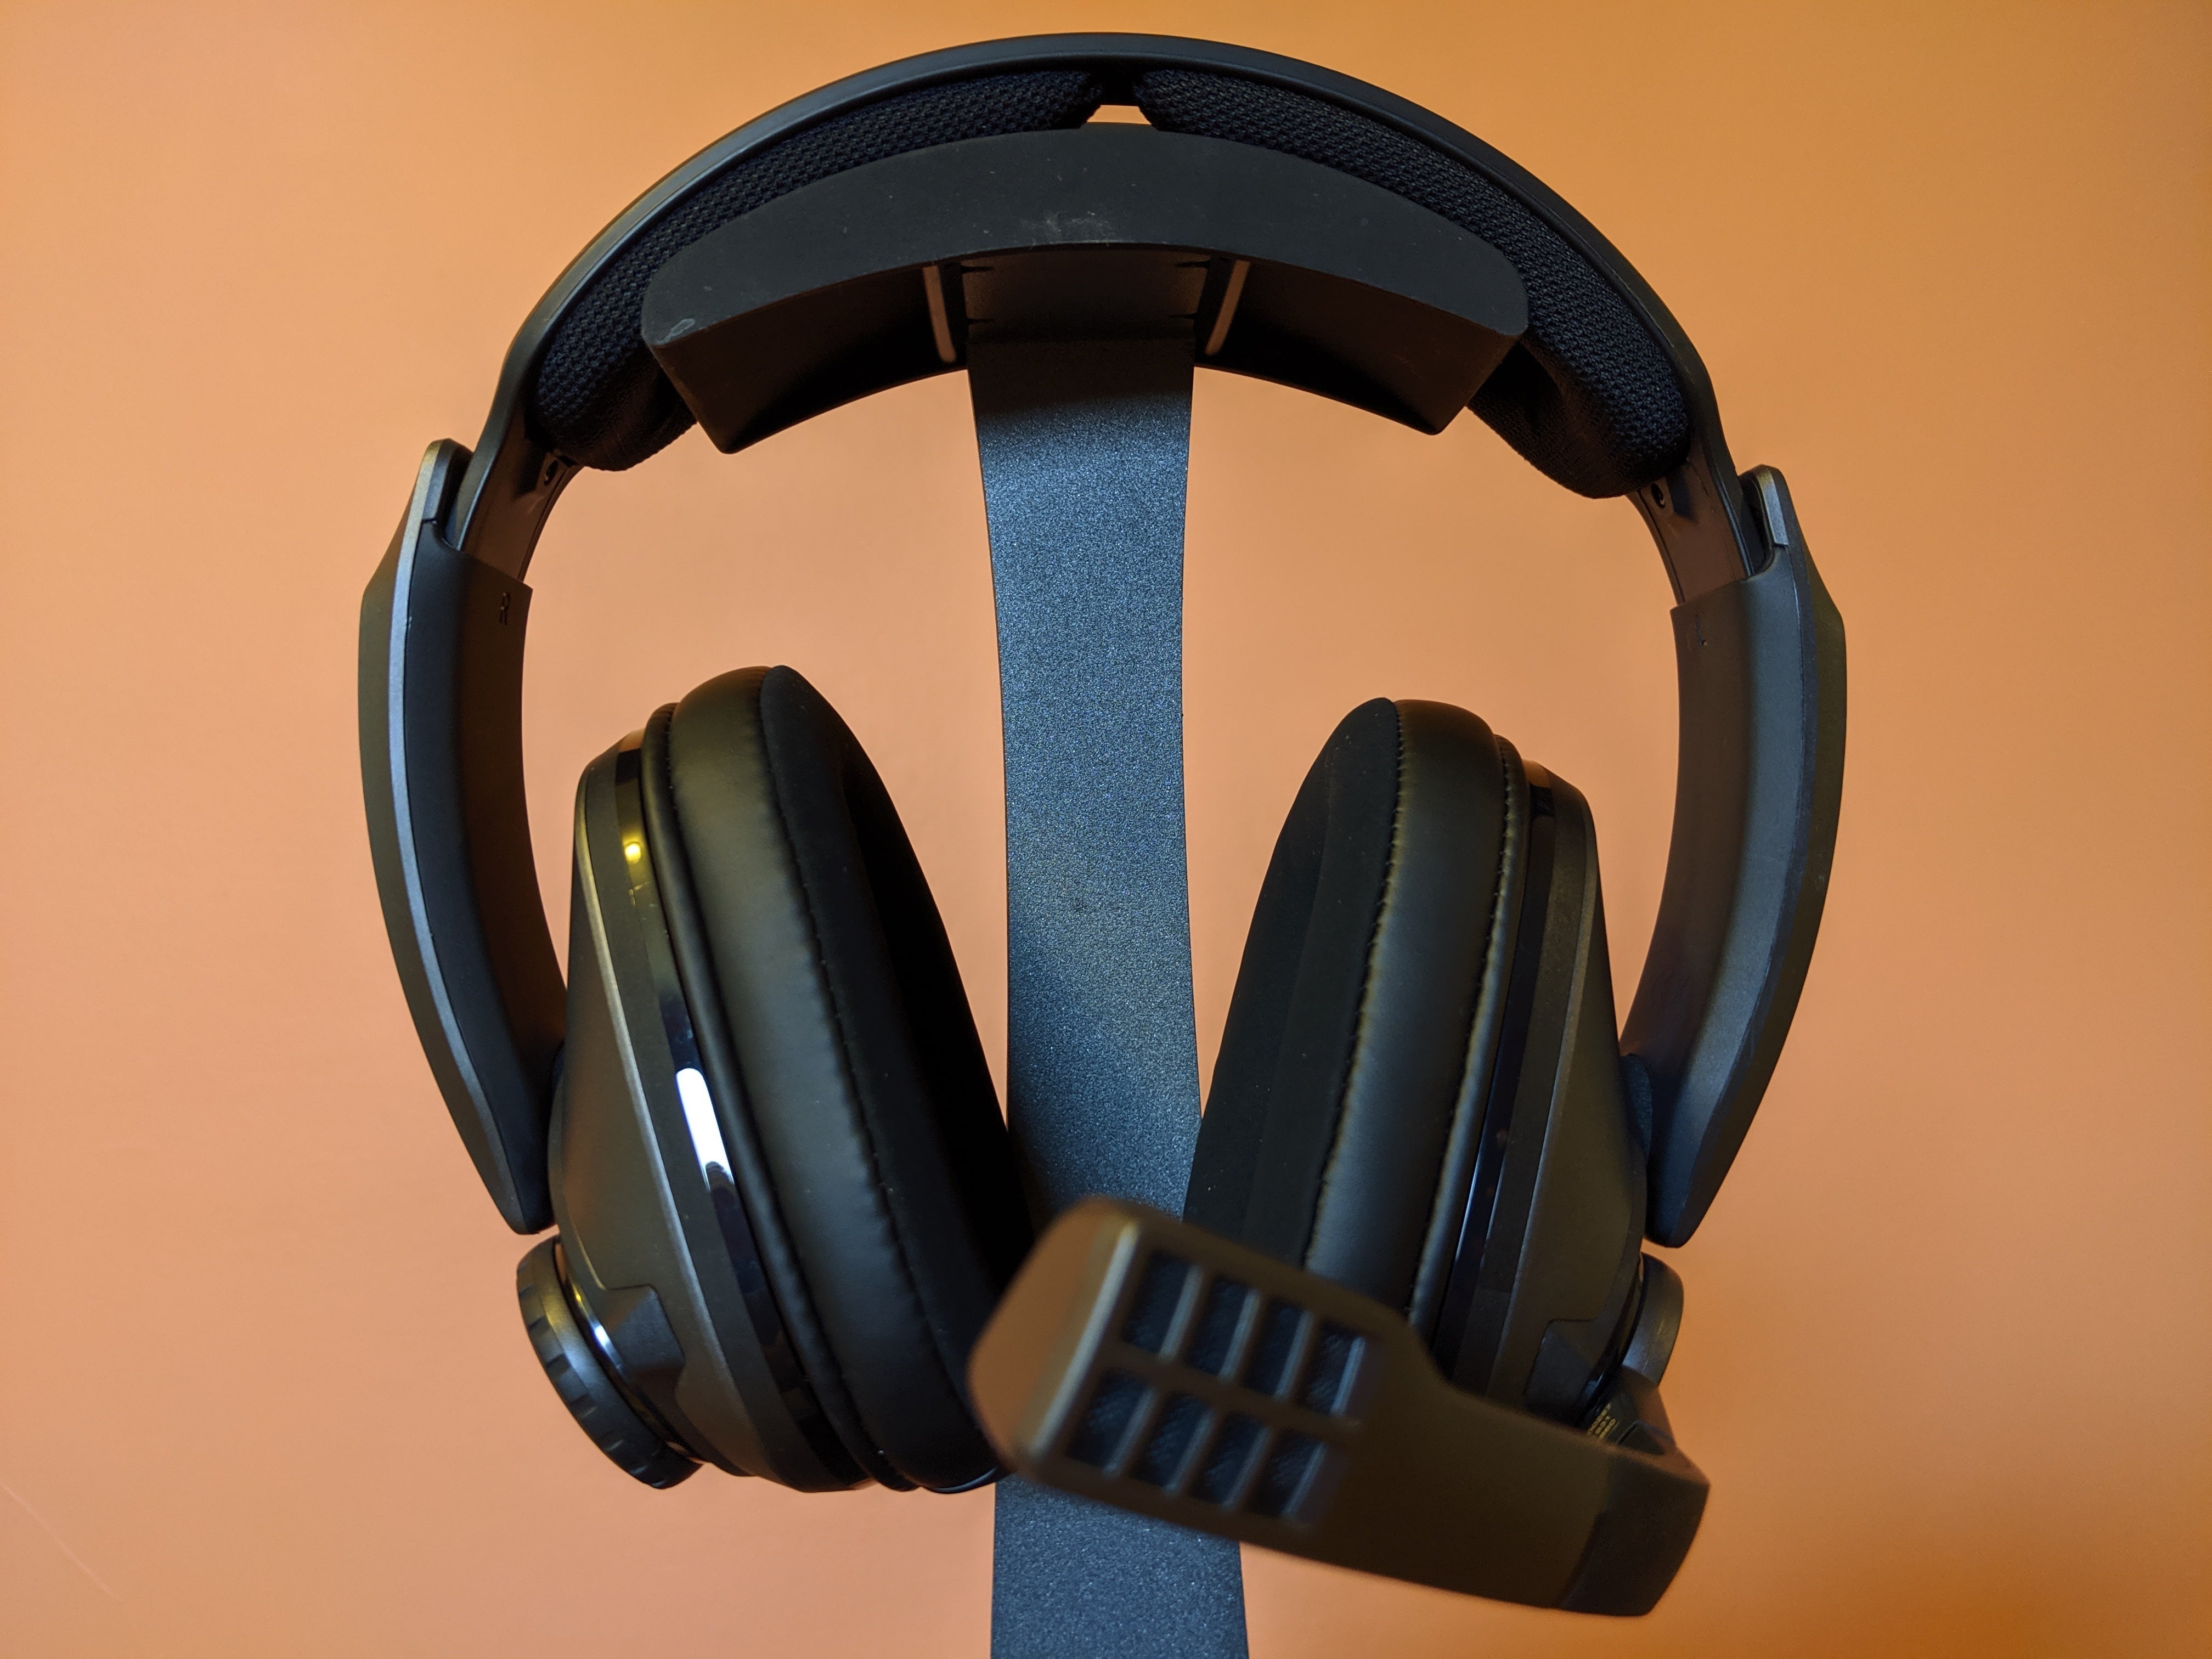 Sennheiser GSP 370 review: A wireless headset that lasts for 100 hours